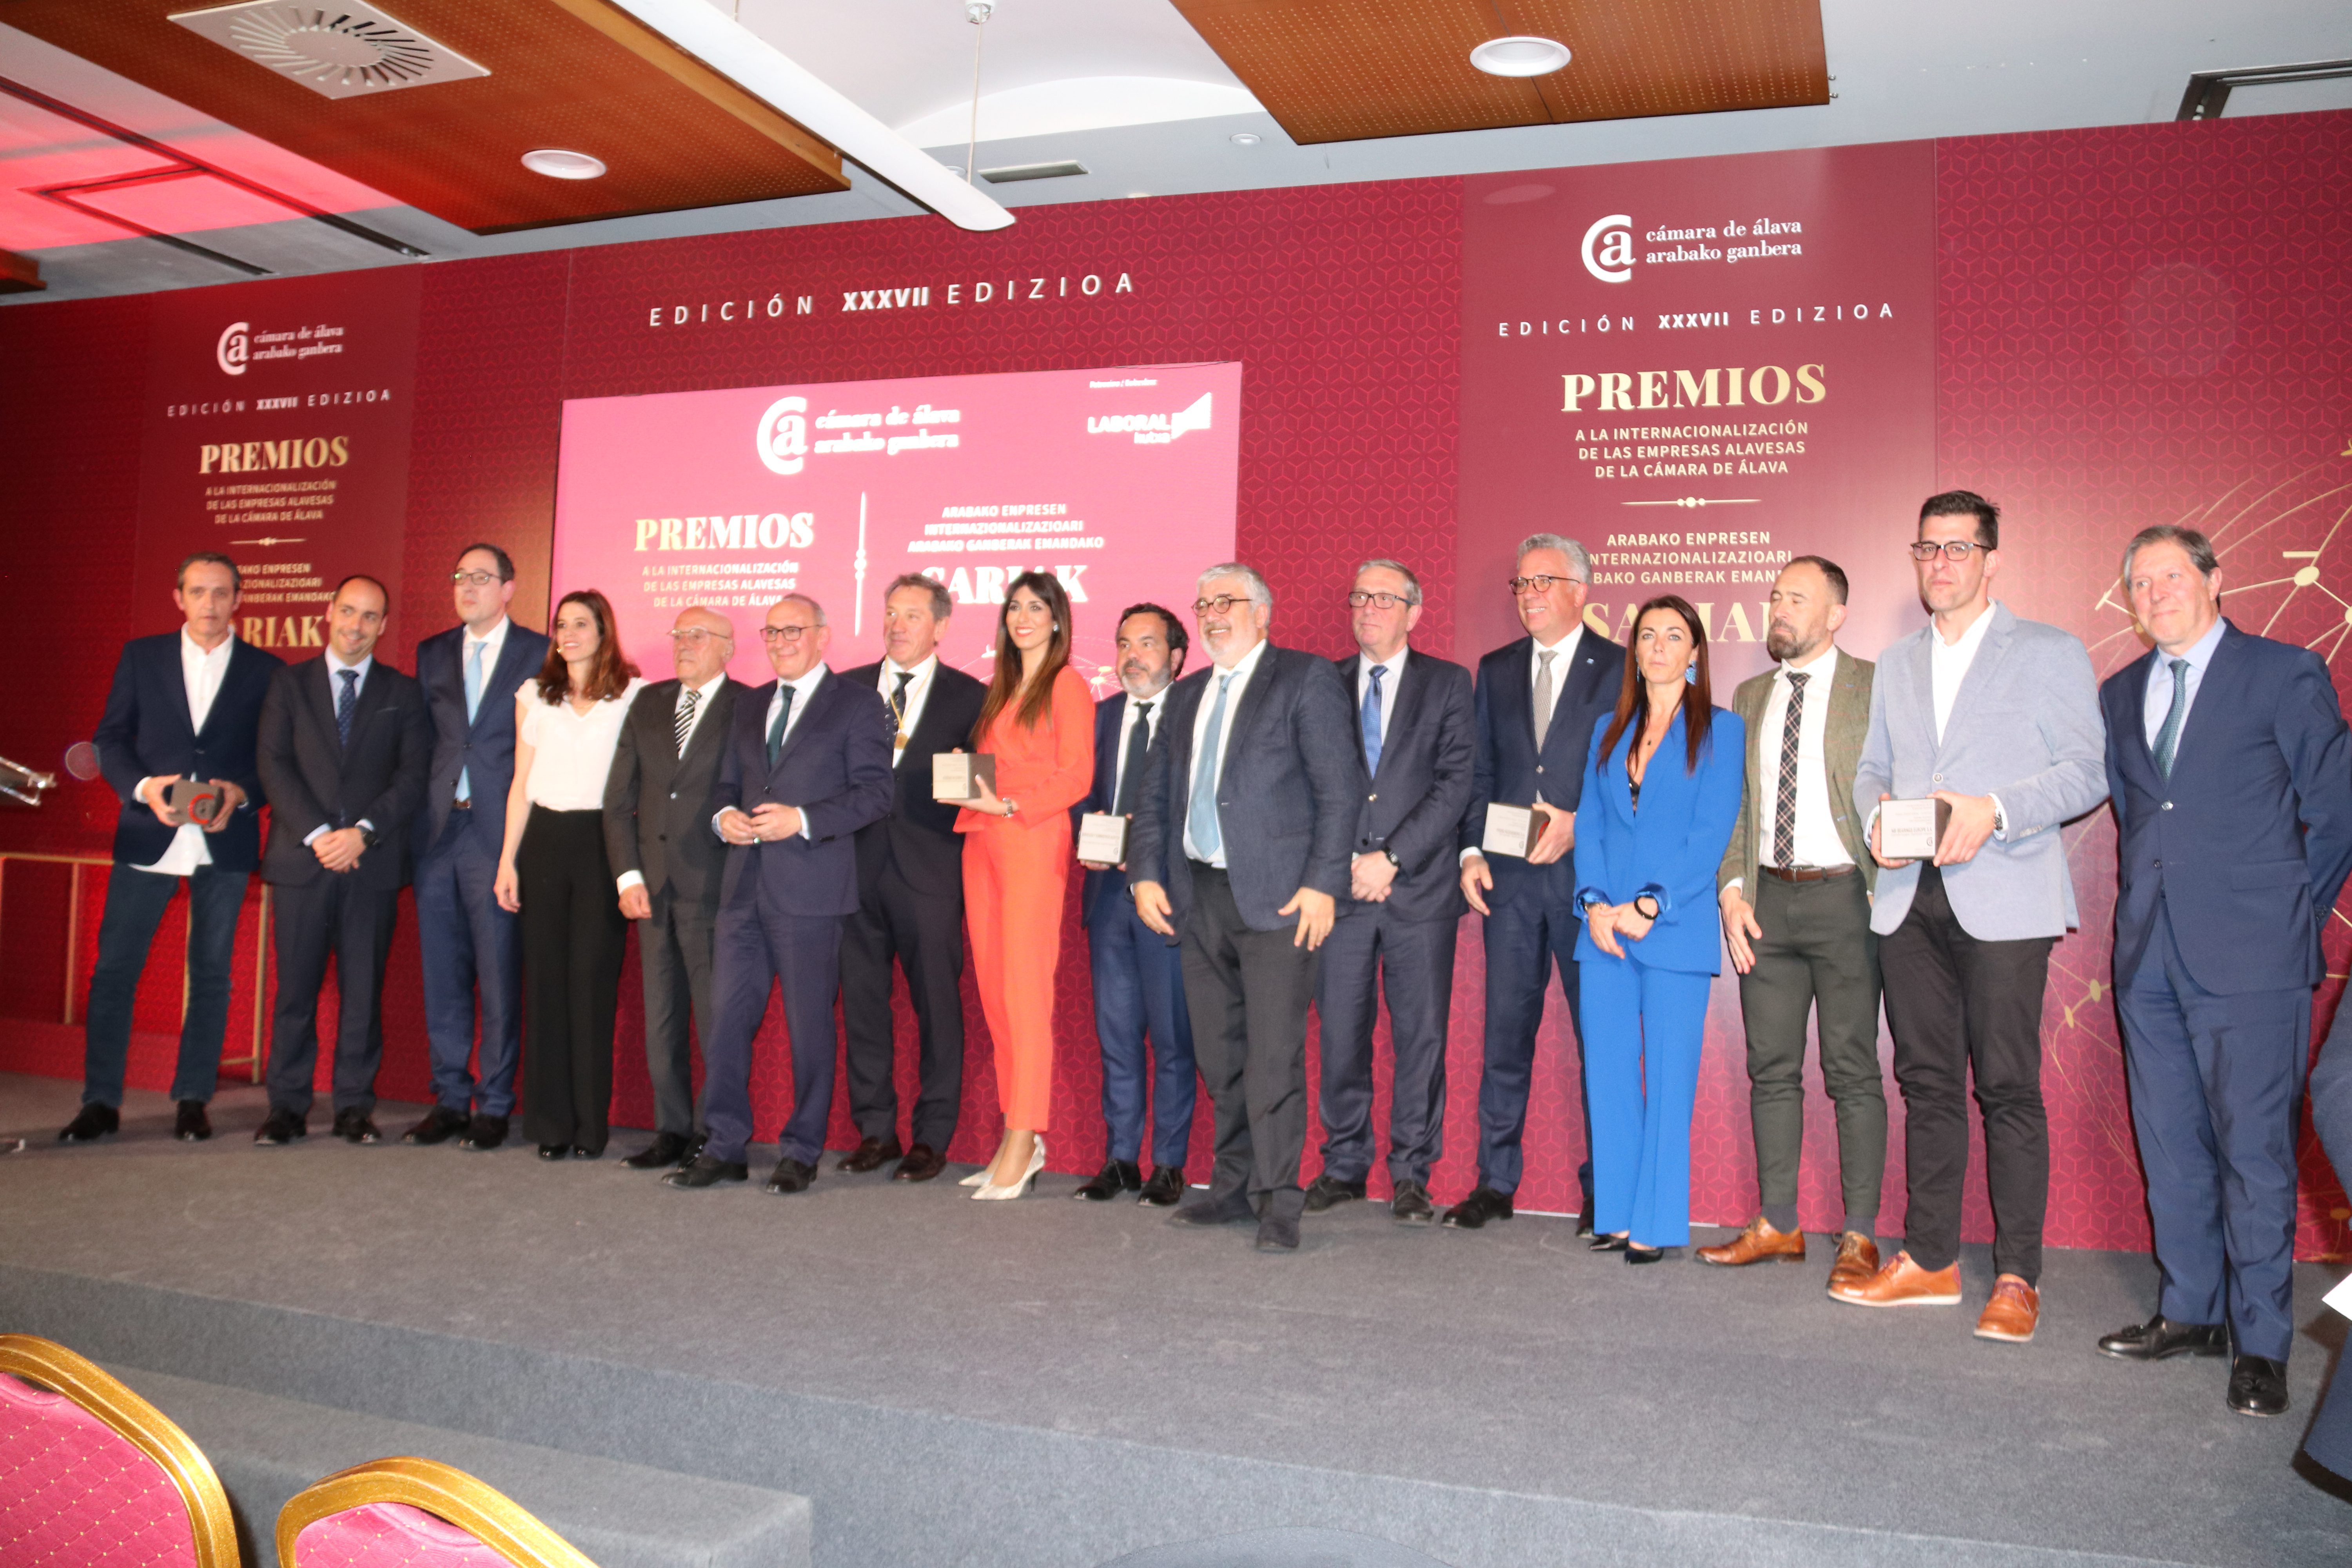 AWARDED COMPANIES AT THE 37TH EDITION OF THE AWARDS FOR THE INTERNATIONALIZATION OF THE COMPANIES FROM ALAVA BY THE CHAMBER OF COMMERCE